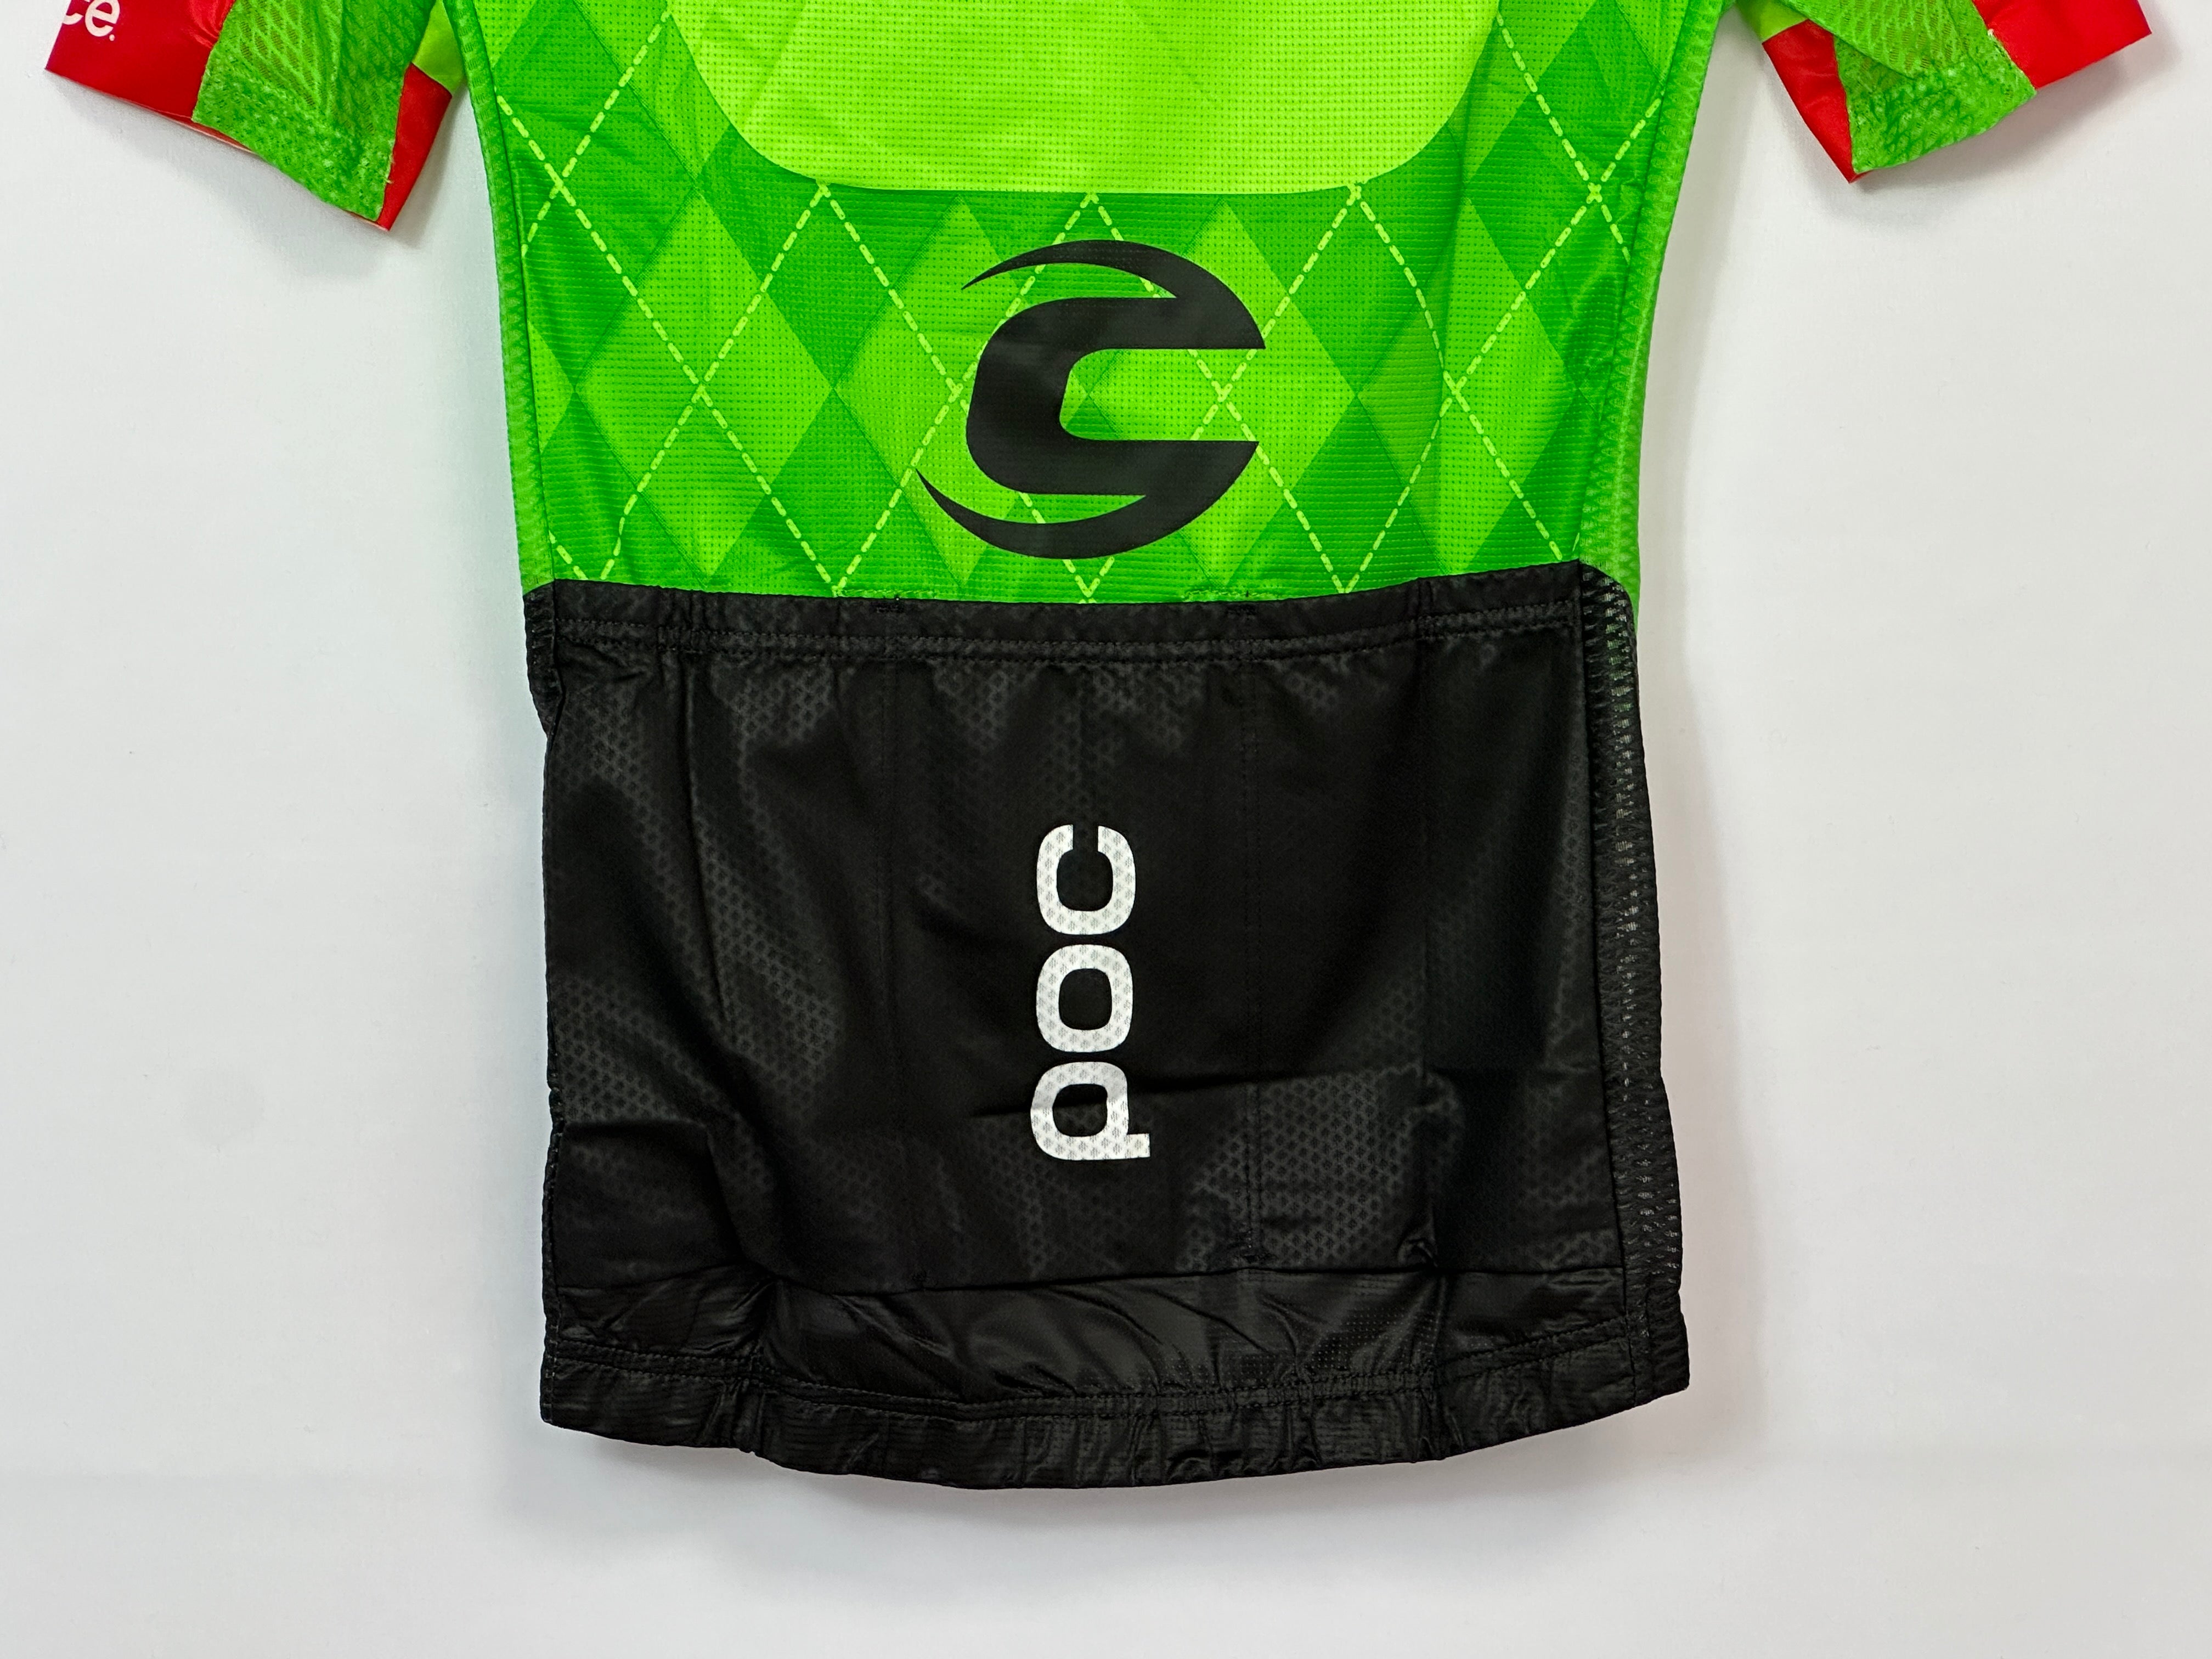 S.S. Race Jersey by Cannondale Drapac